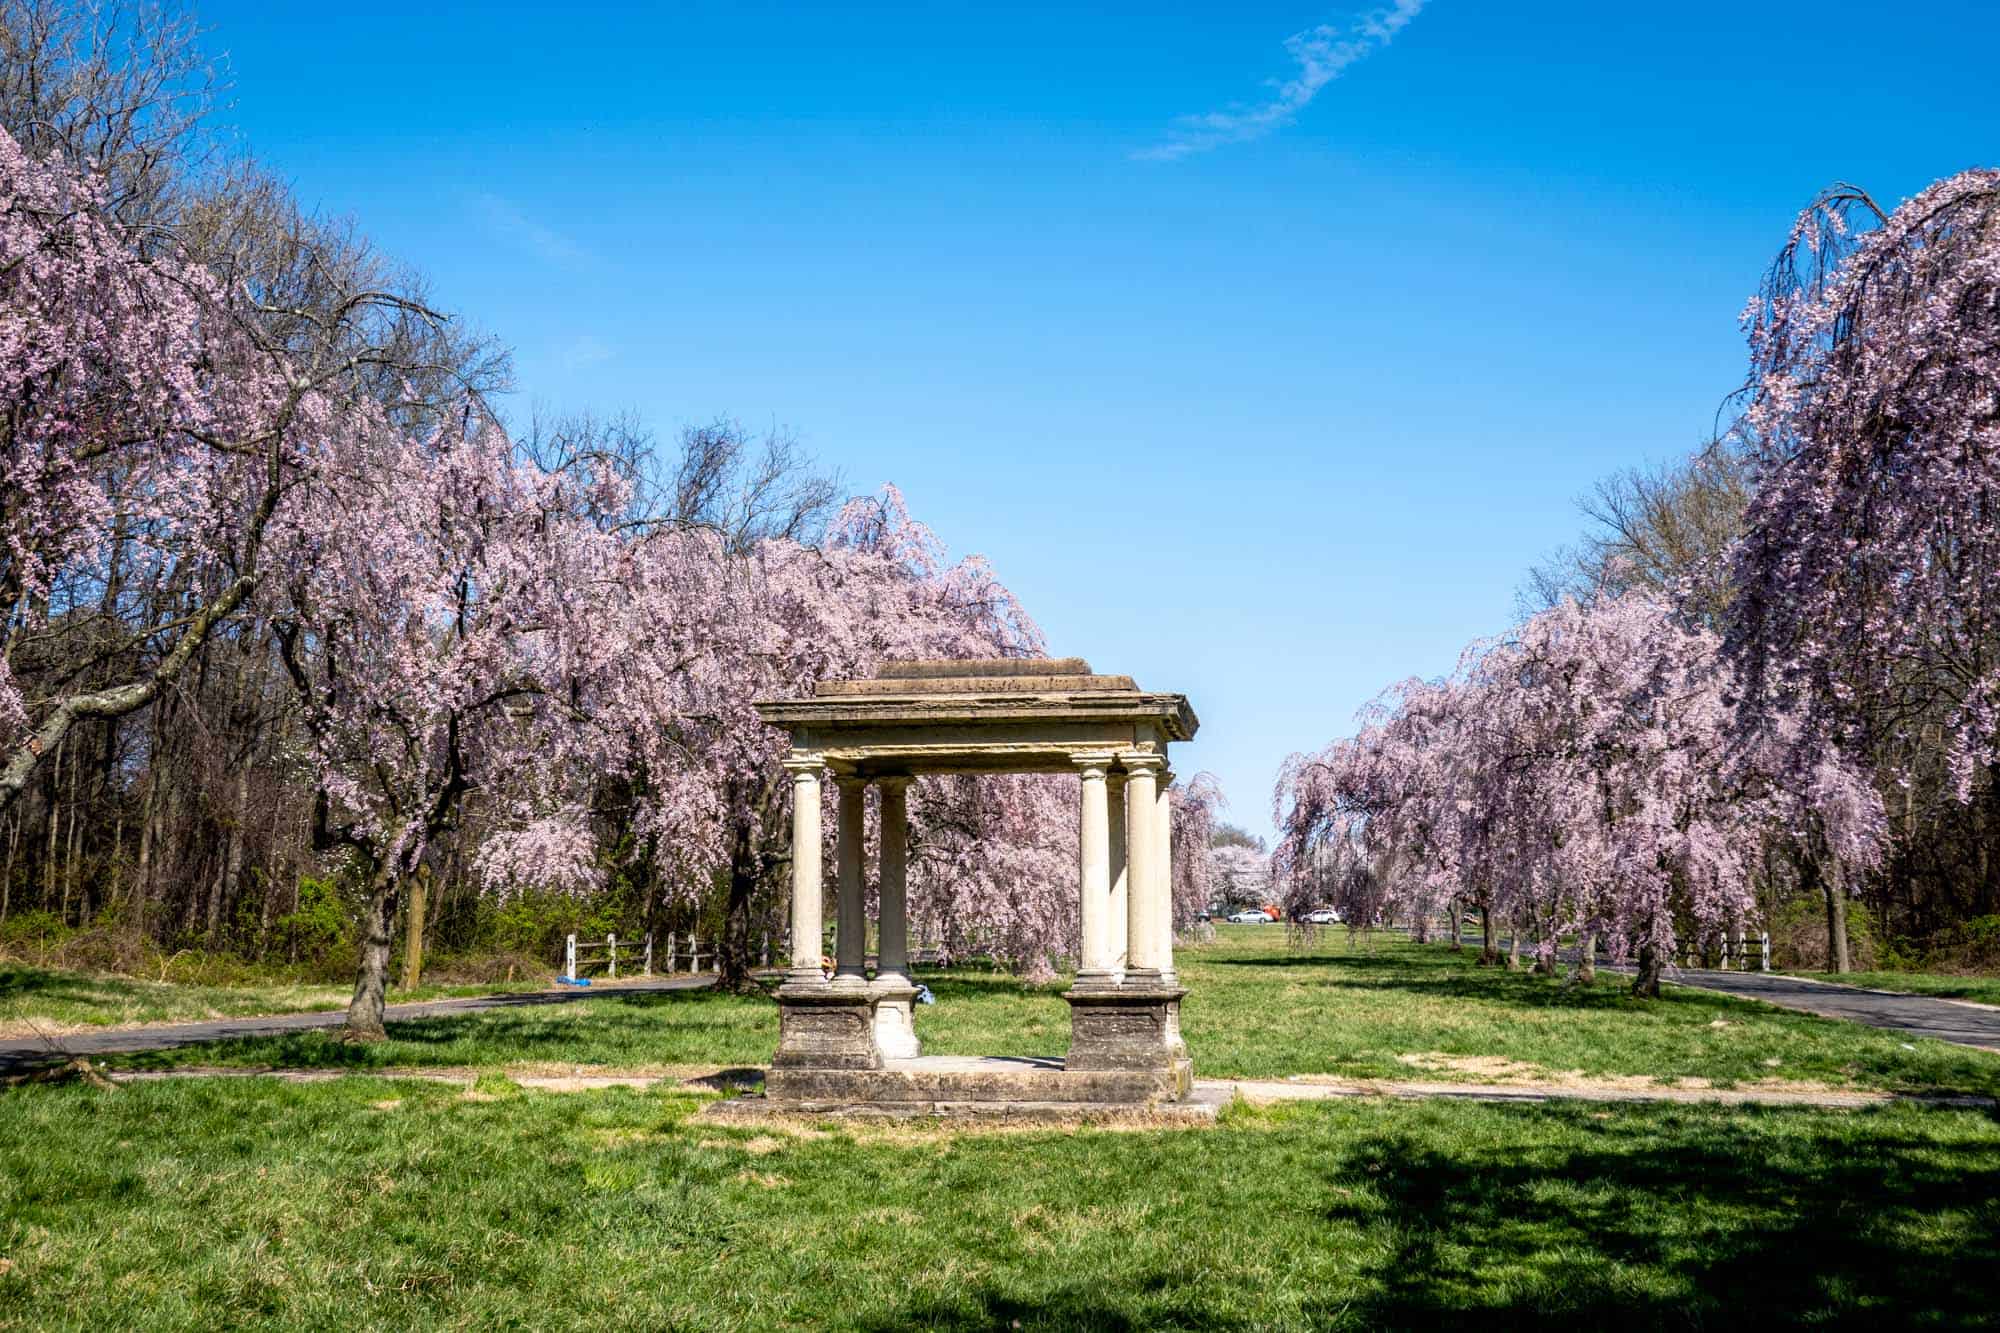 Rows of blooming pink cherry blossom trees in a park with a six-column stone structure in the middle